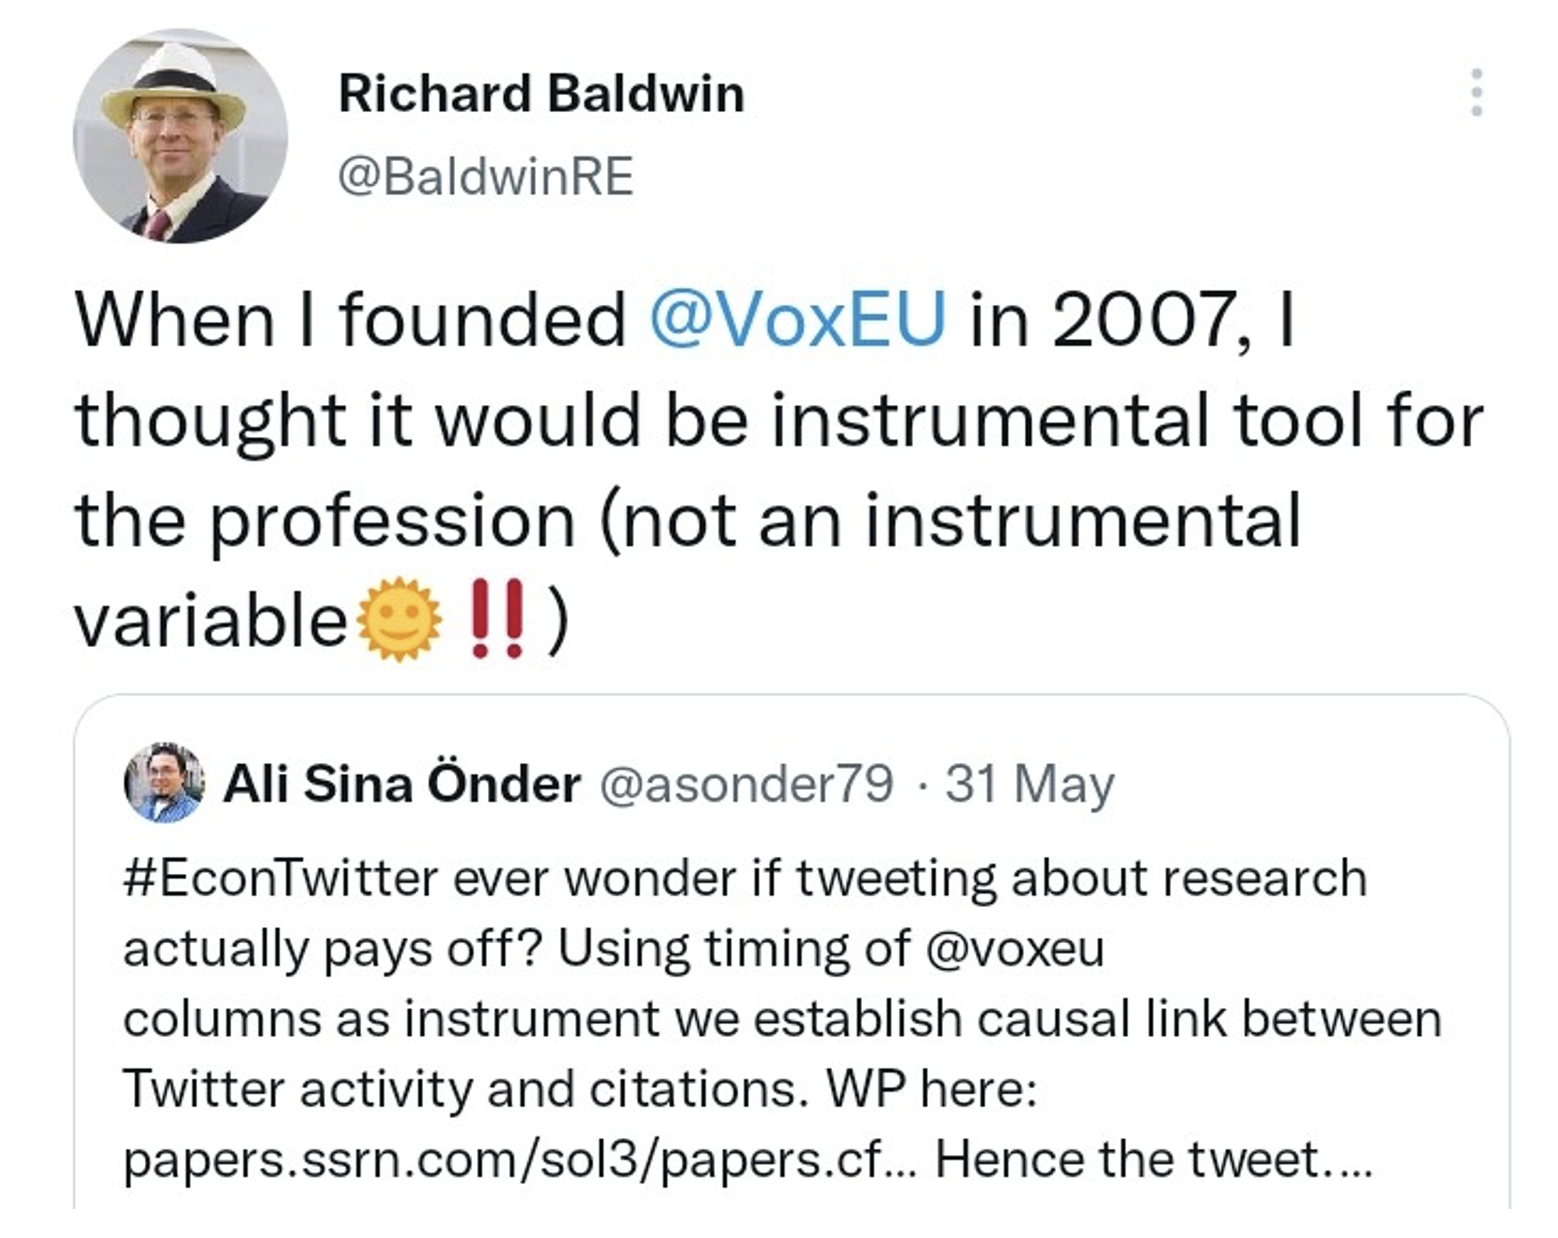 Screenshot of Richard Baldwin’s tweet “When I founded VoxEU in 2007, I thought it would be instrumental tool for the profession (not an instrumental variable!)”. Retweet of Ali Sina Önder’s tweet “#EconTwitter ever wonder if tweeting about research actually pays off? Using timing of @voxeu columns as instrument we establish causal link between Twitter activity and citations. WP here:” with truncated URL.